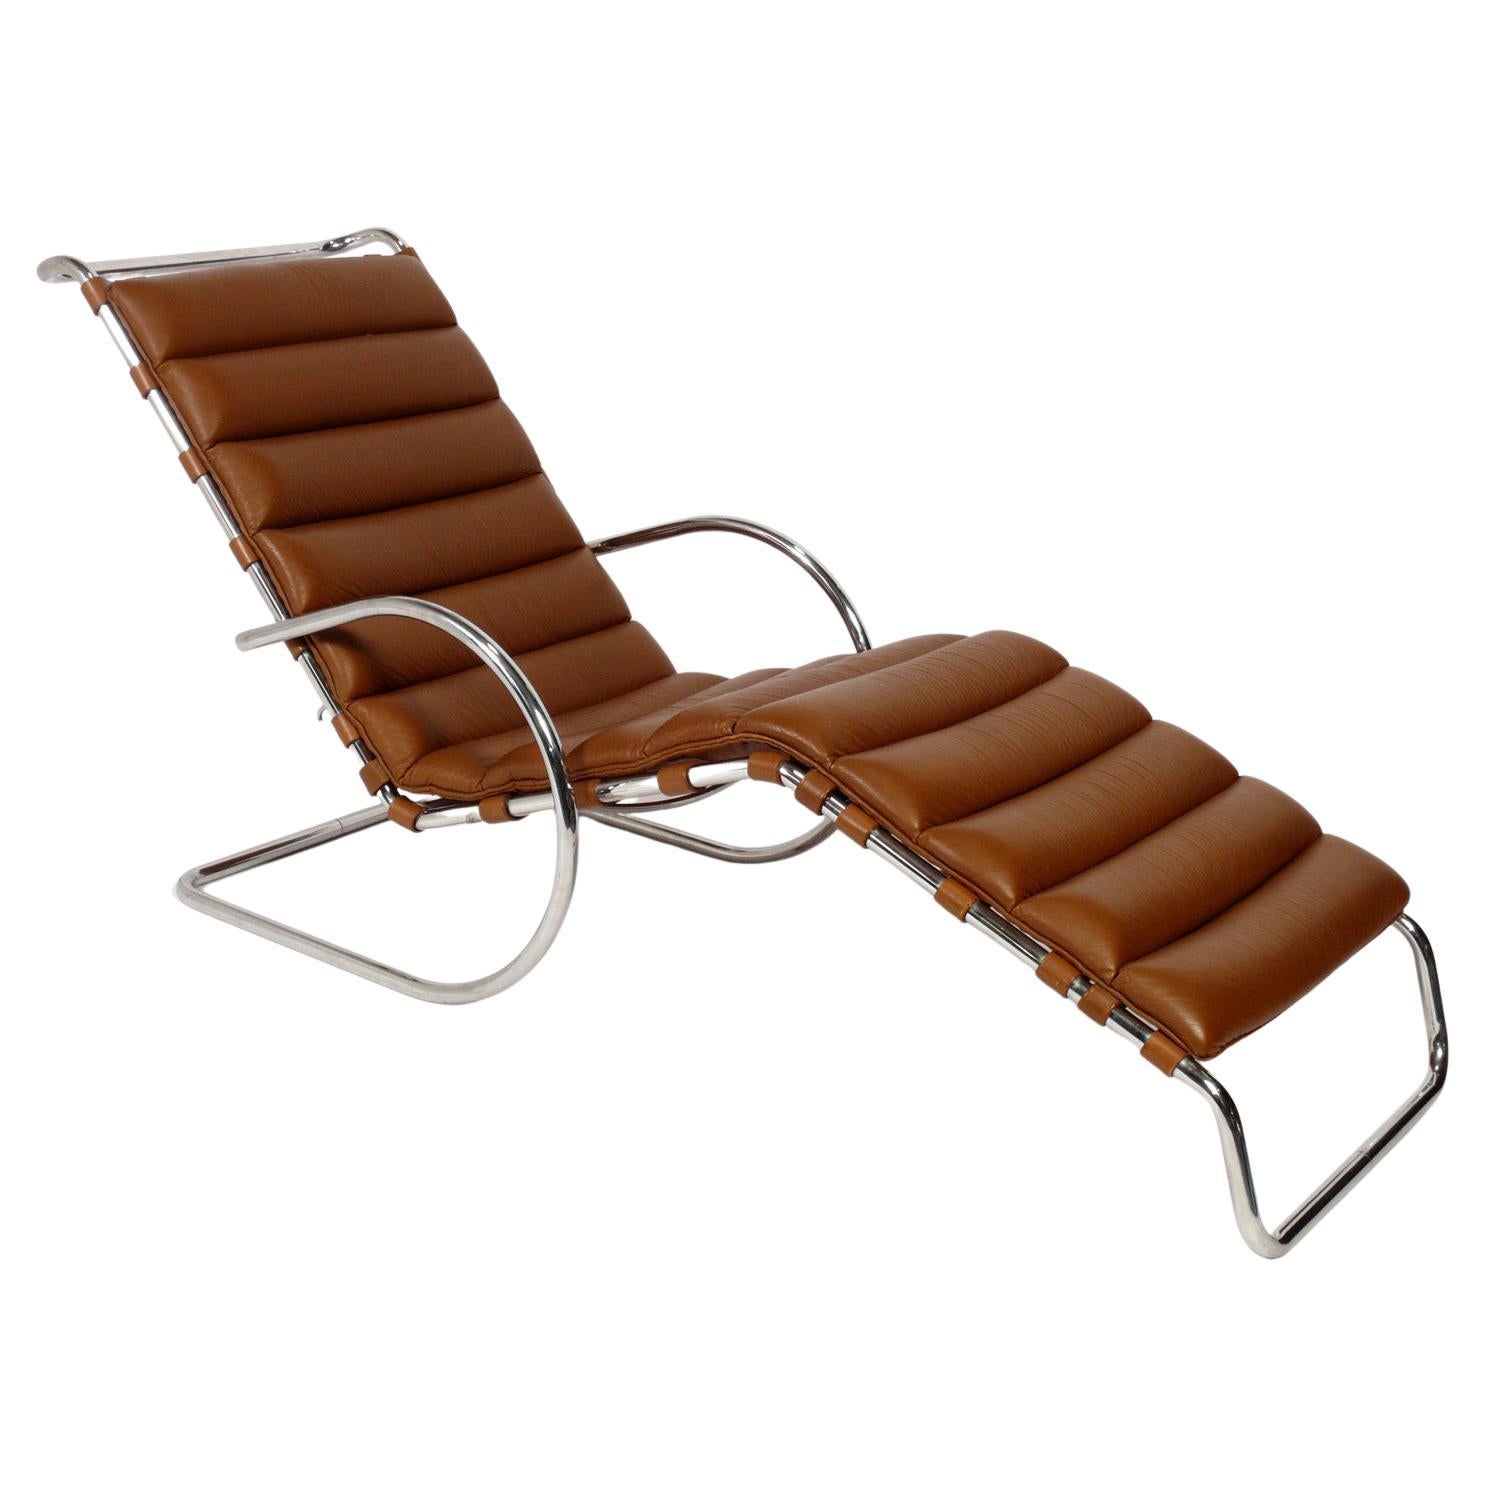 Mies van der Rohe for Knoll Chaise Lounge in Caramel Leather